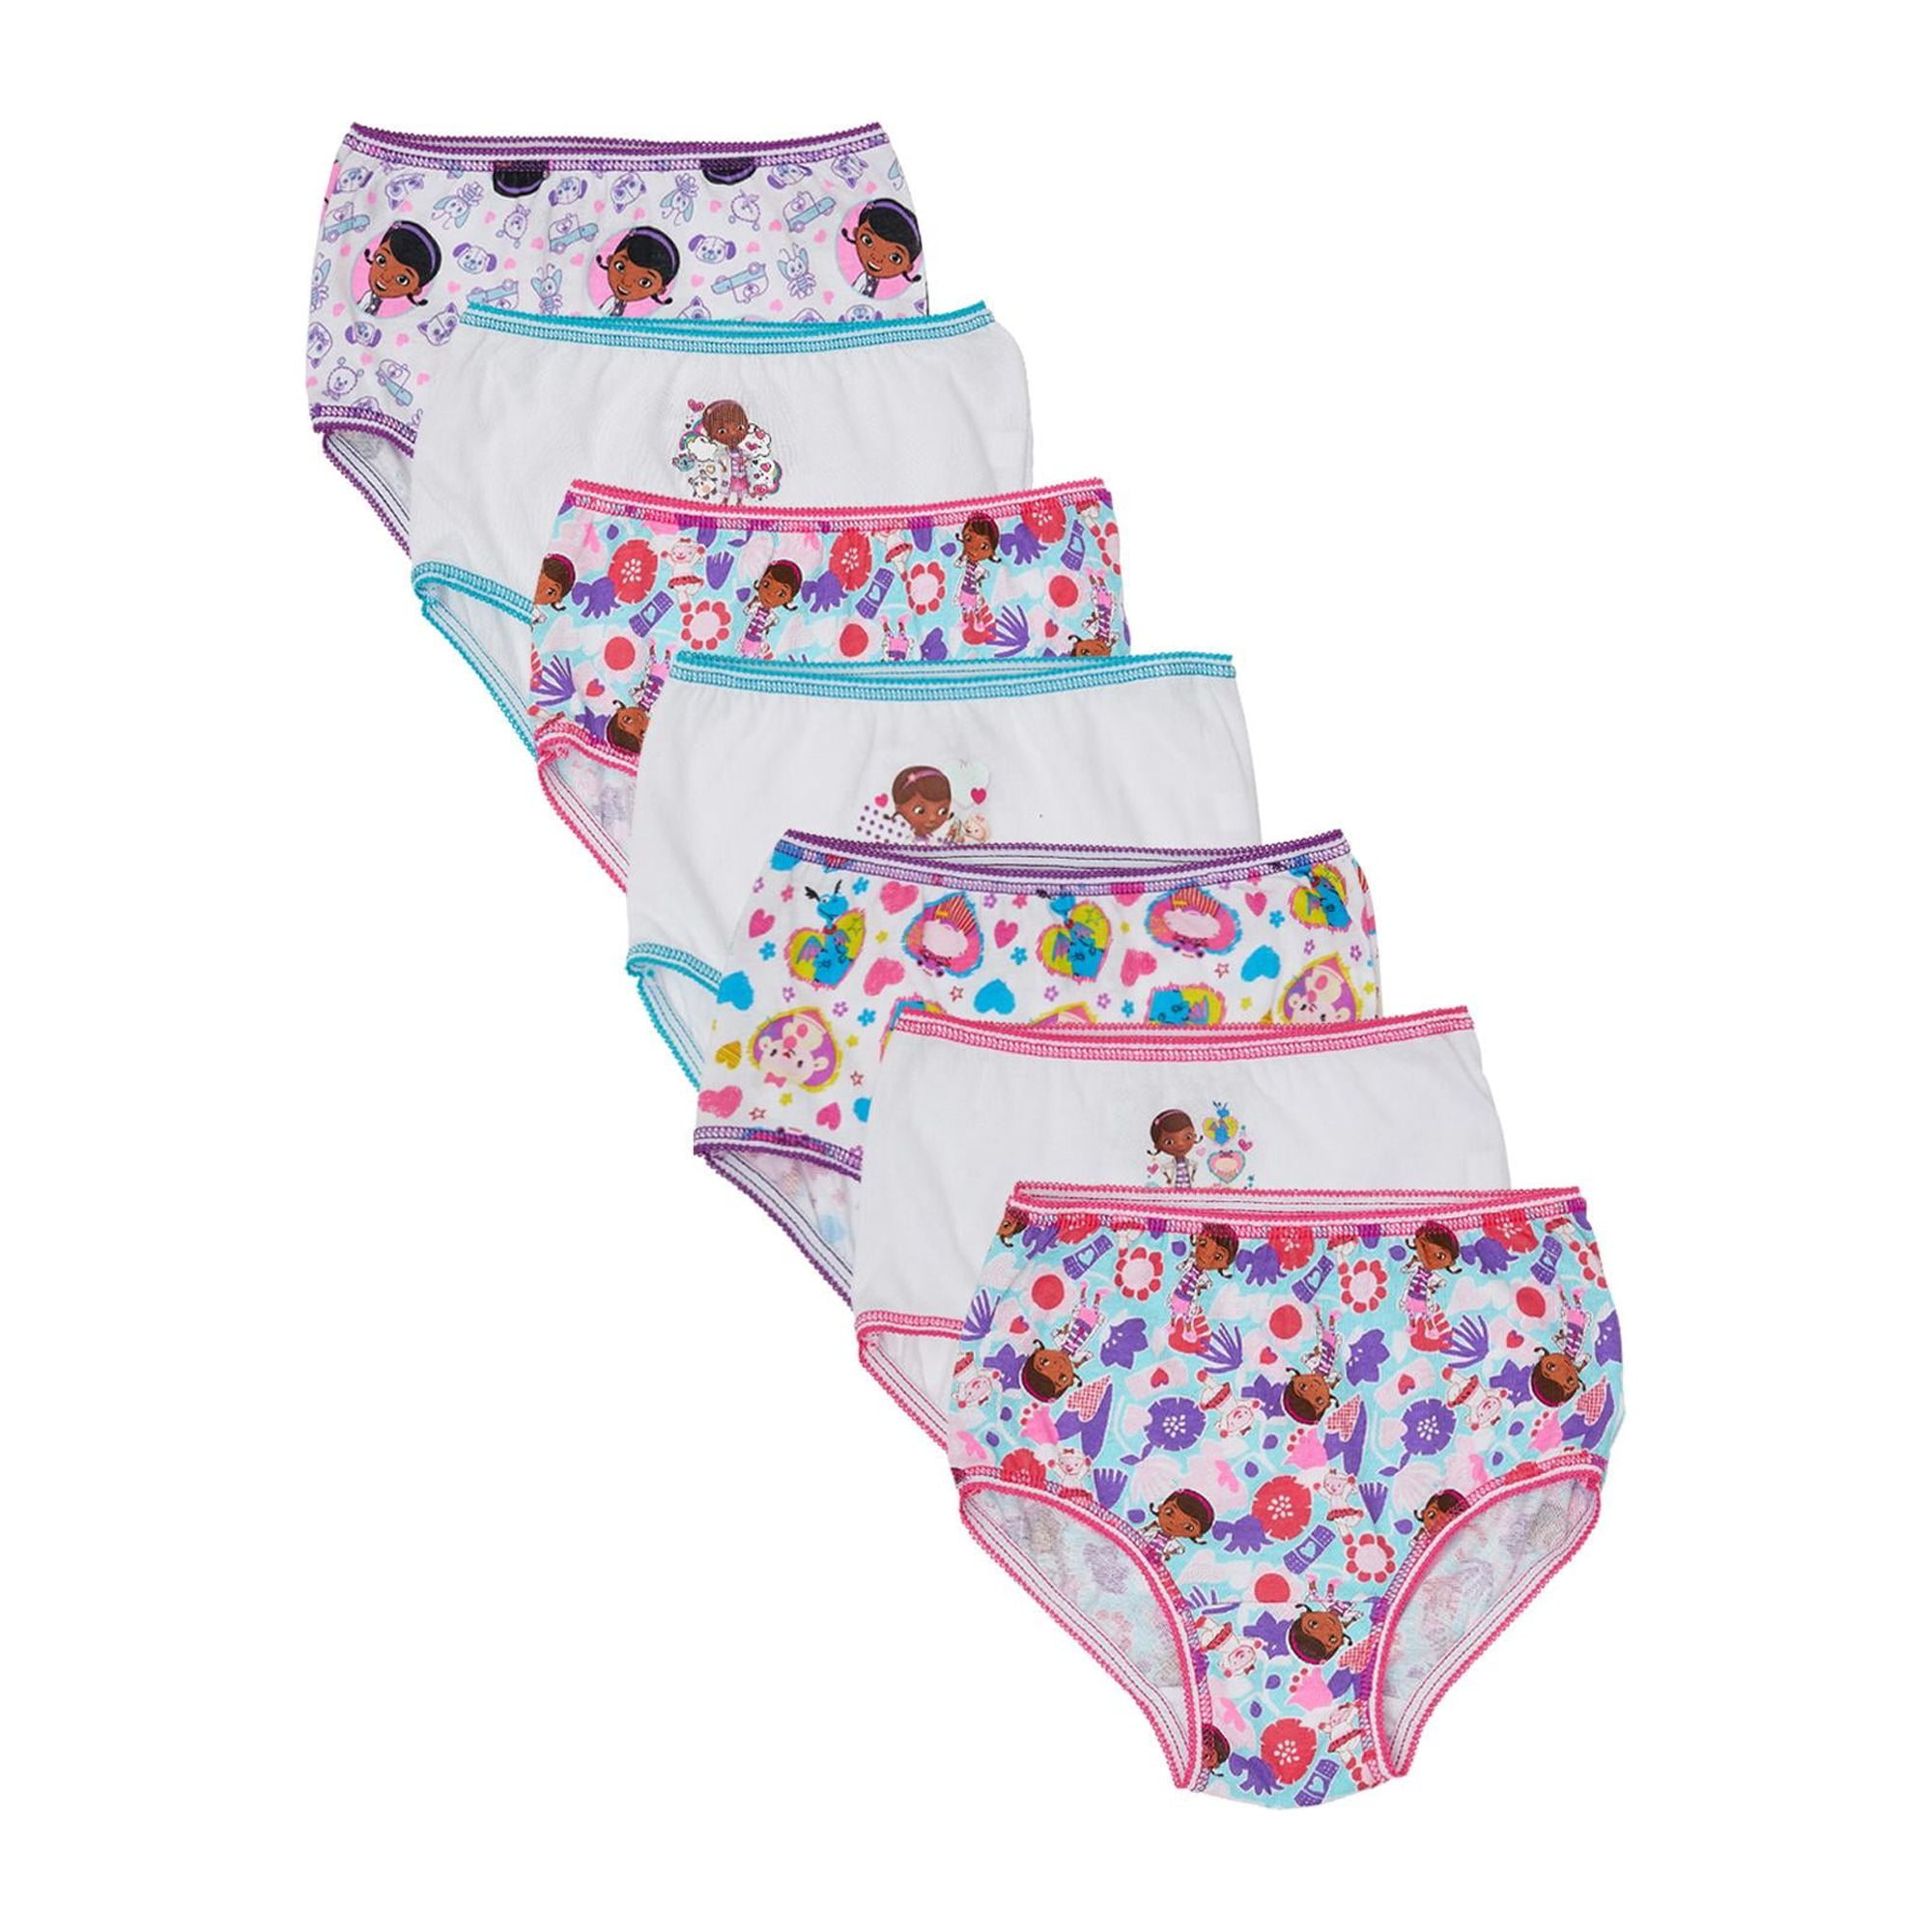 Minnie Mouse Girls Panties Underwear - 8-Pack Toddler/Little Kid/Big Kid  Size Briefs Mickey Clubhouse